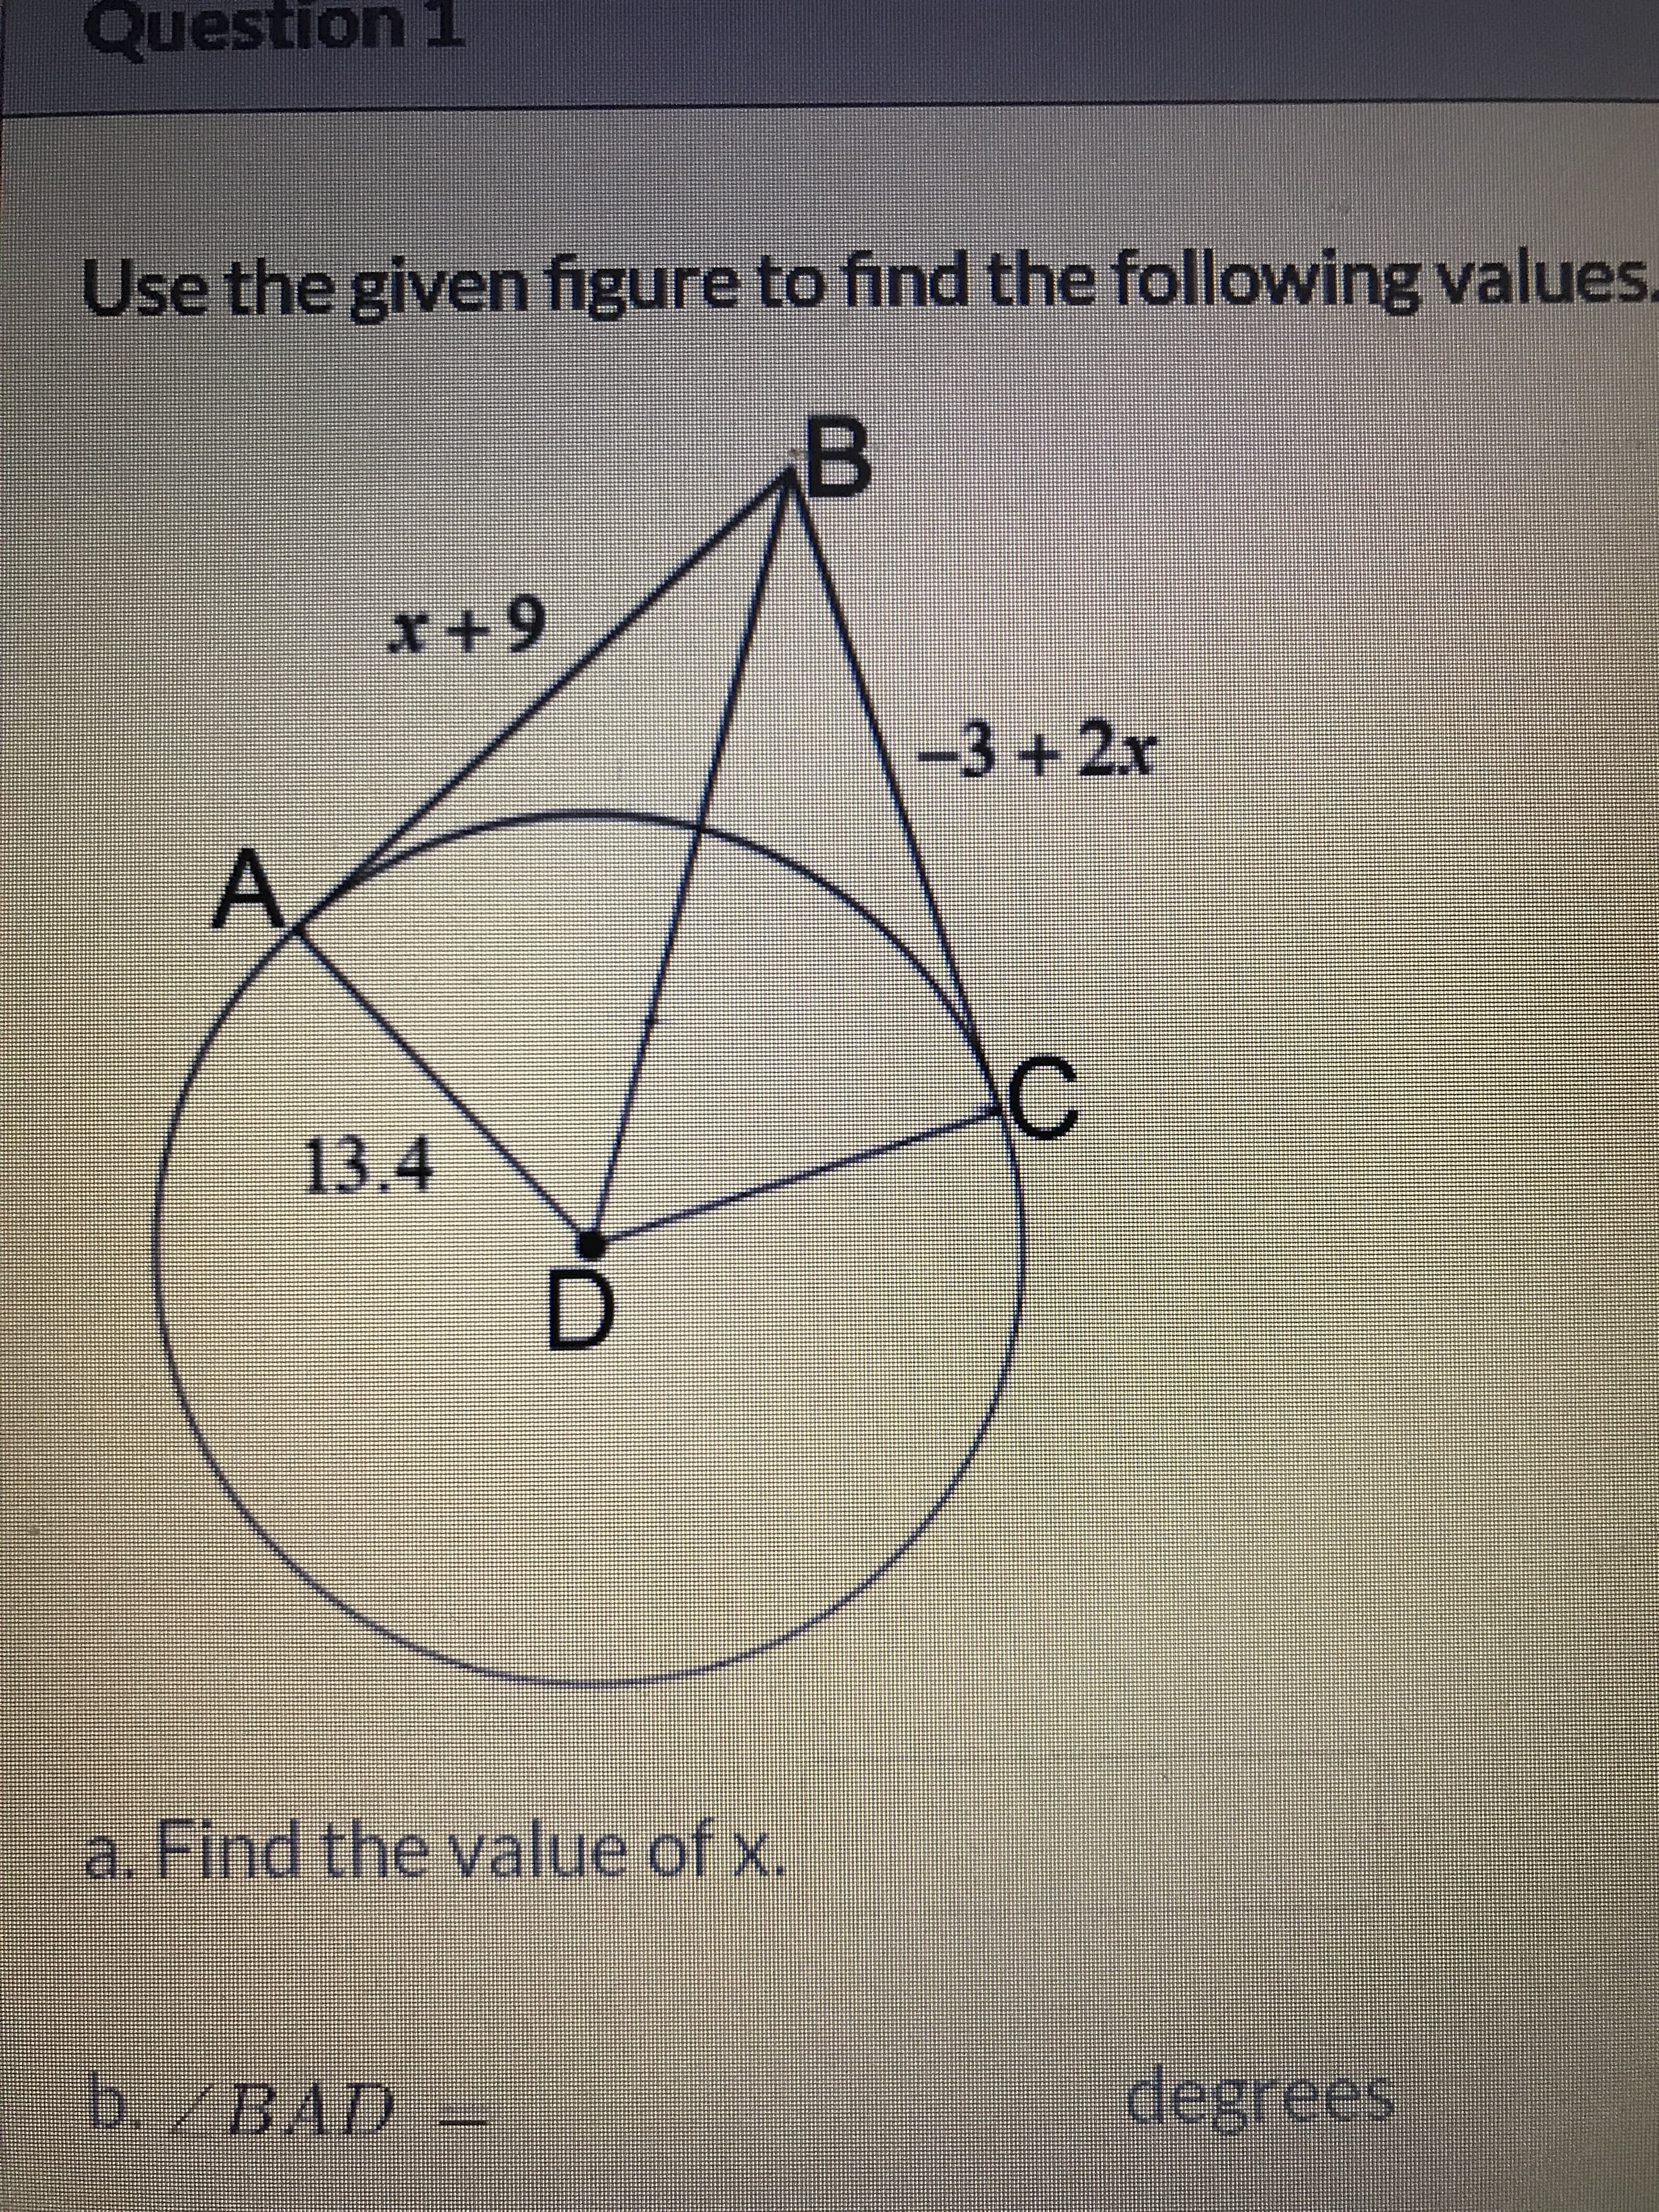 Use the given figure to find the following values
